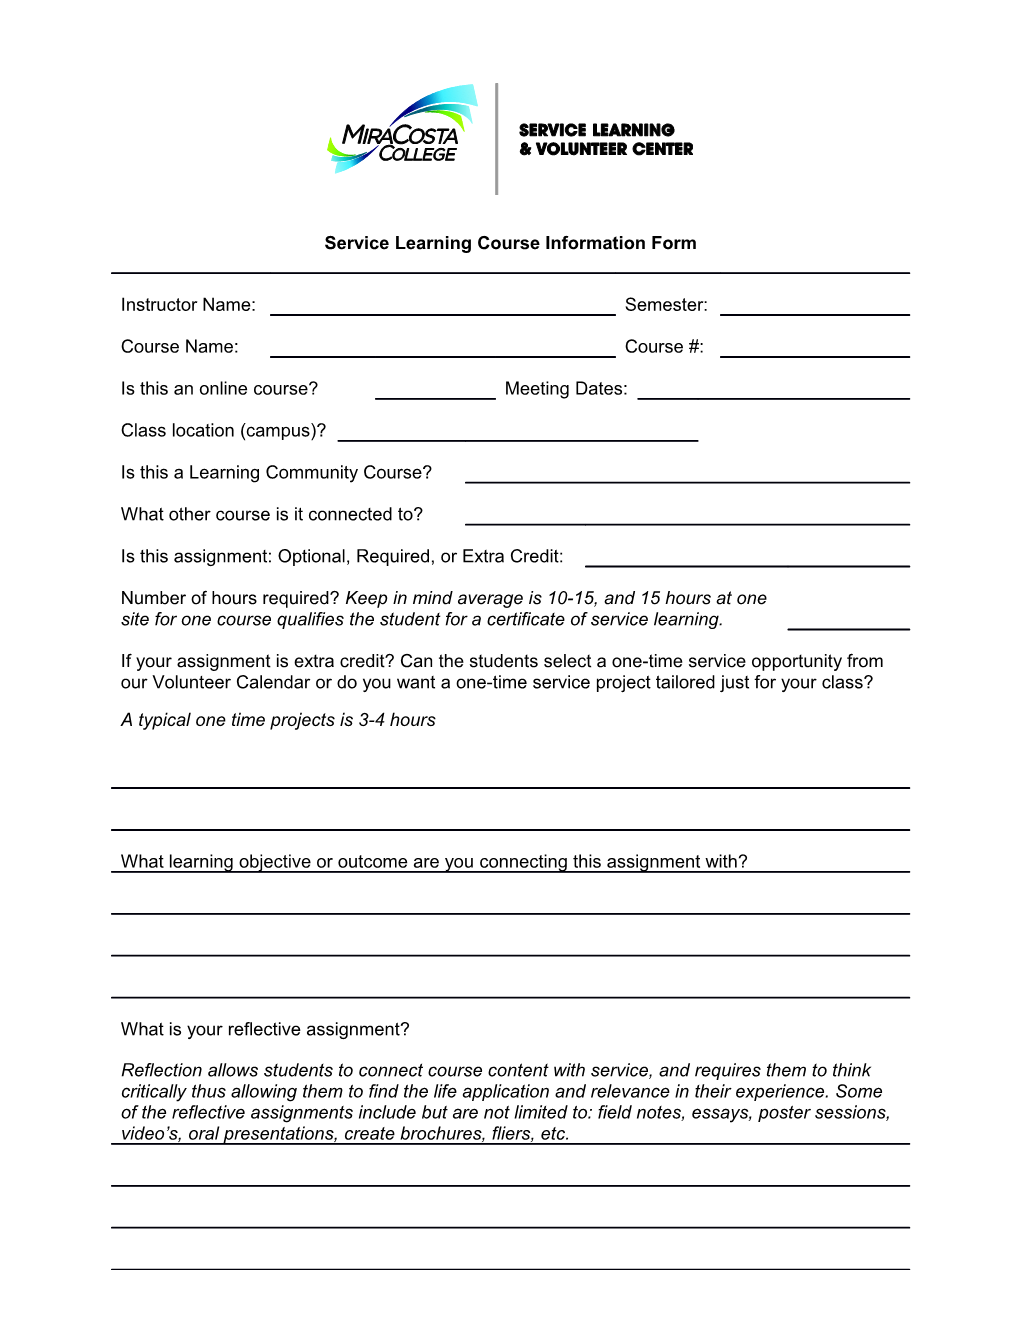 Service Learning Course Information Form